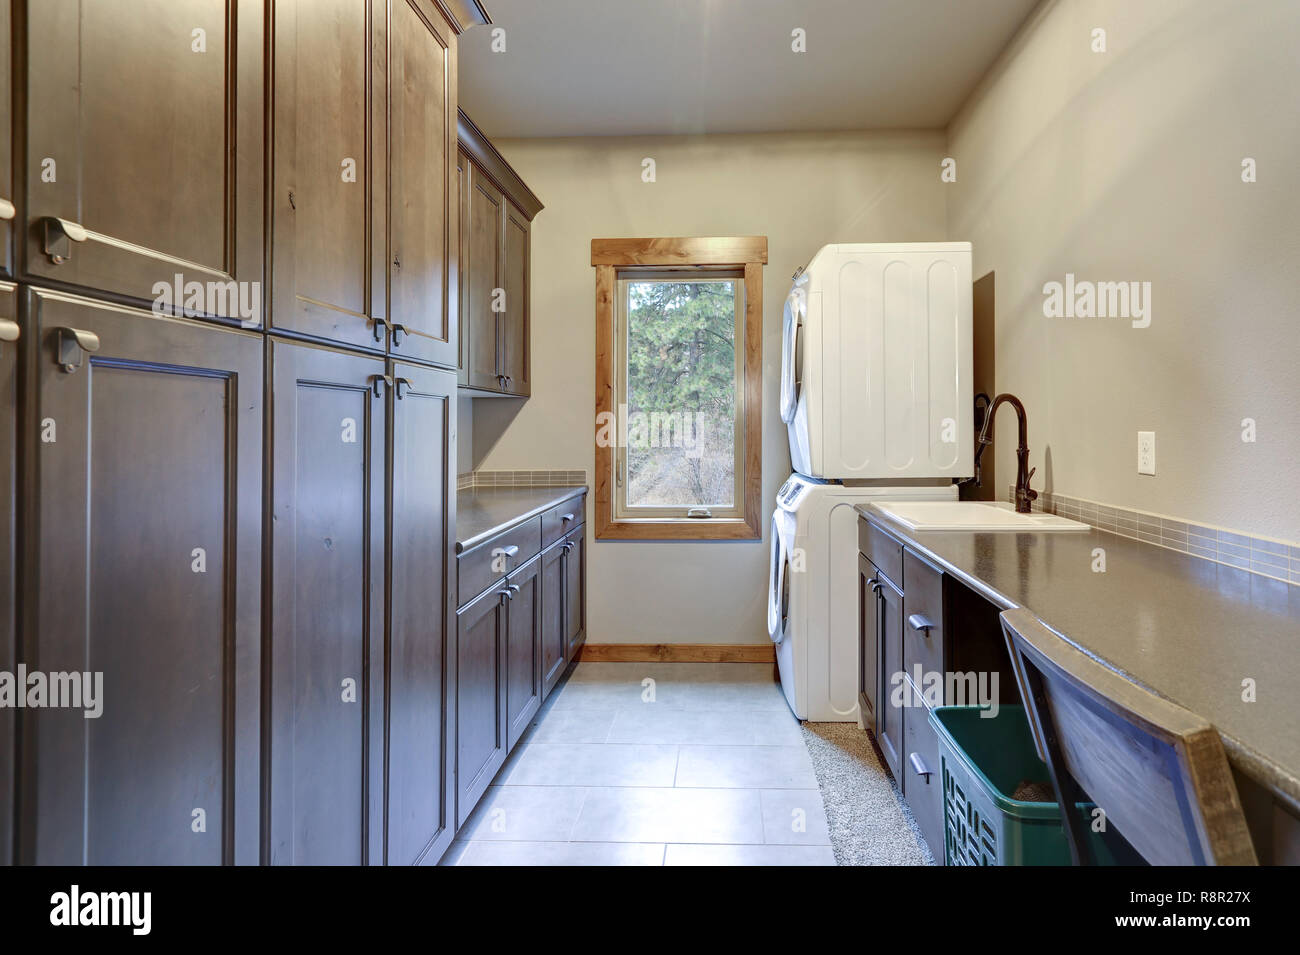 Laundry room with a stacked white front loading washer and dryer, floor to ceiling dark shaker cabinets. Stock Photo